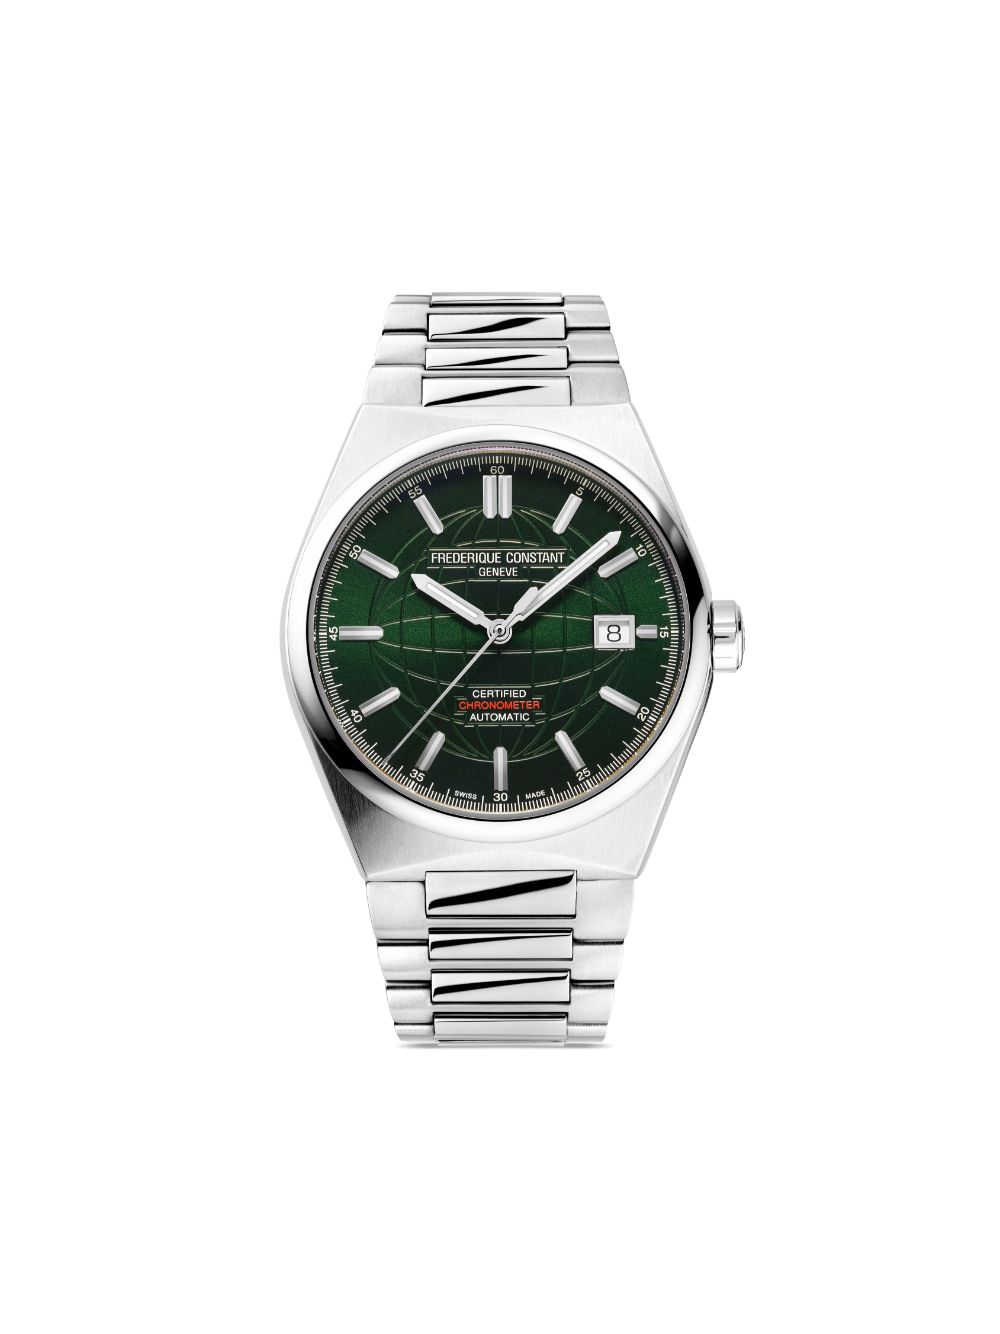 Highlife Automatic COSC 39mm